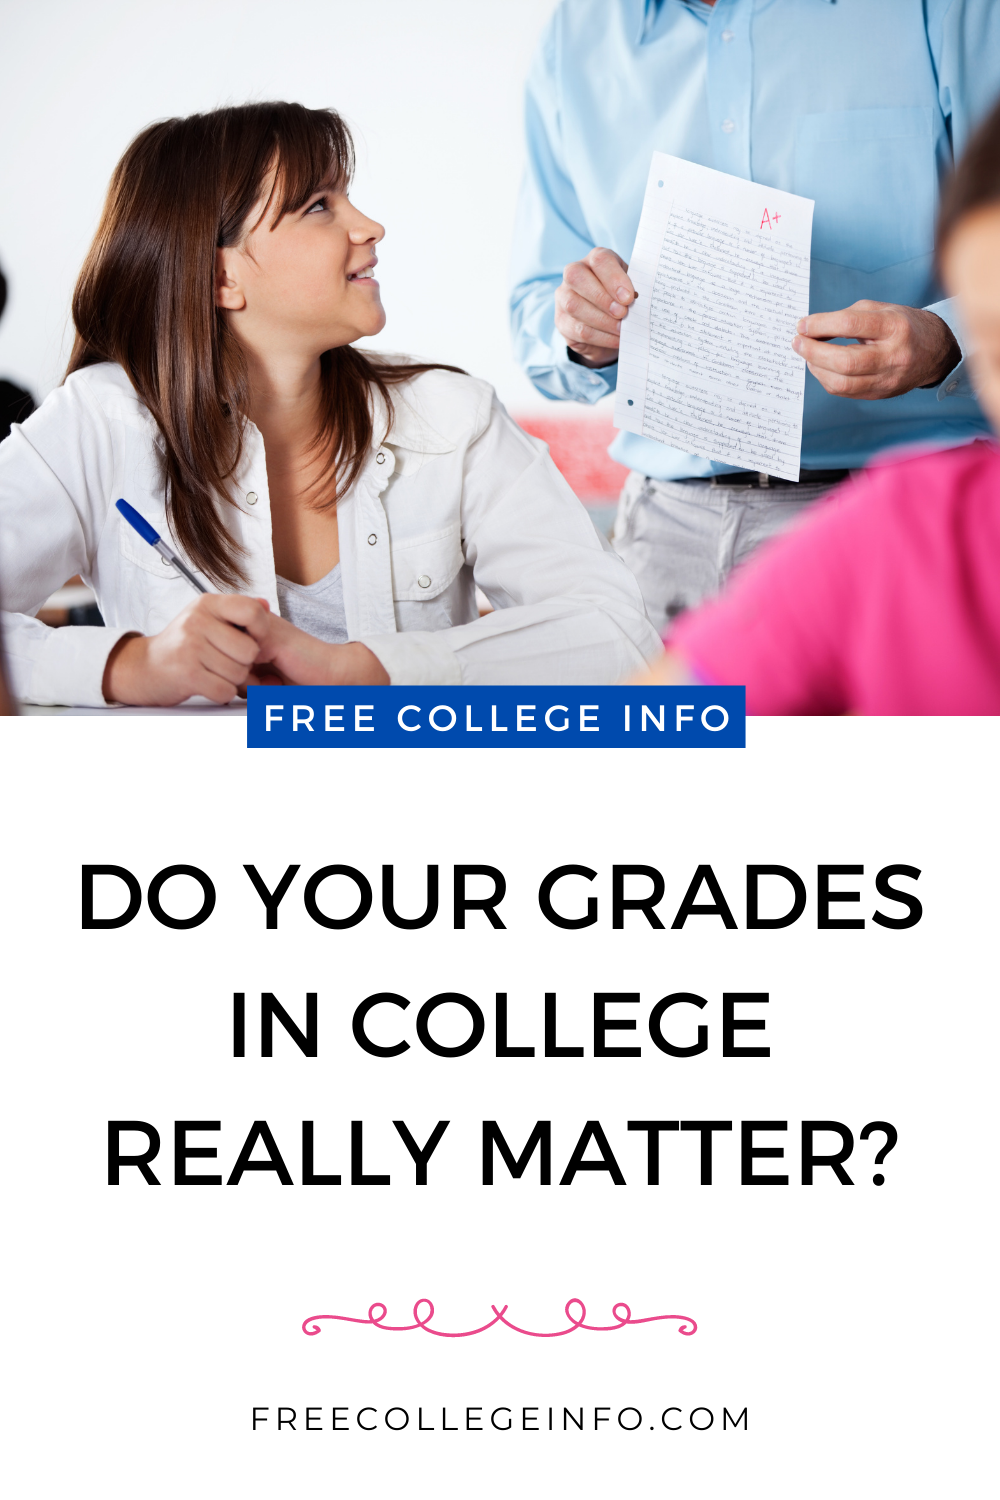 Do your grades in college really matter